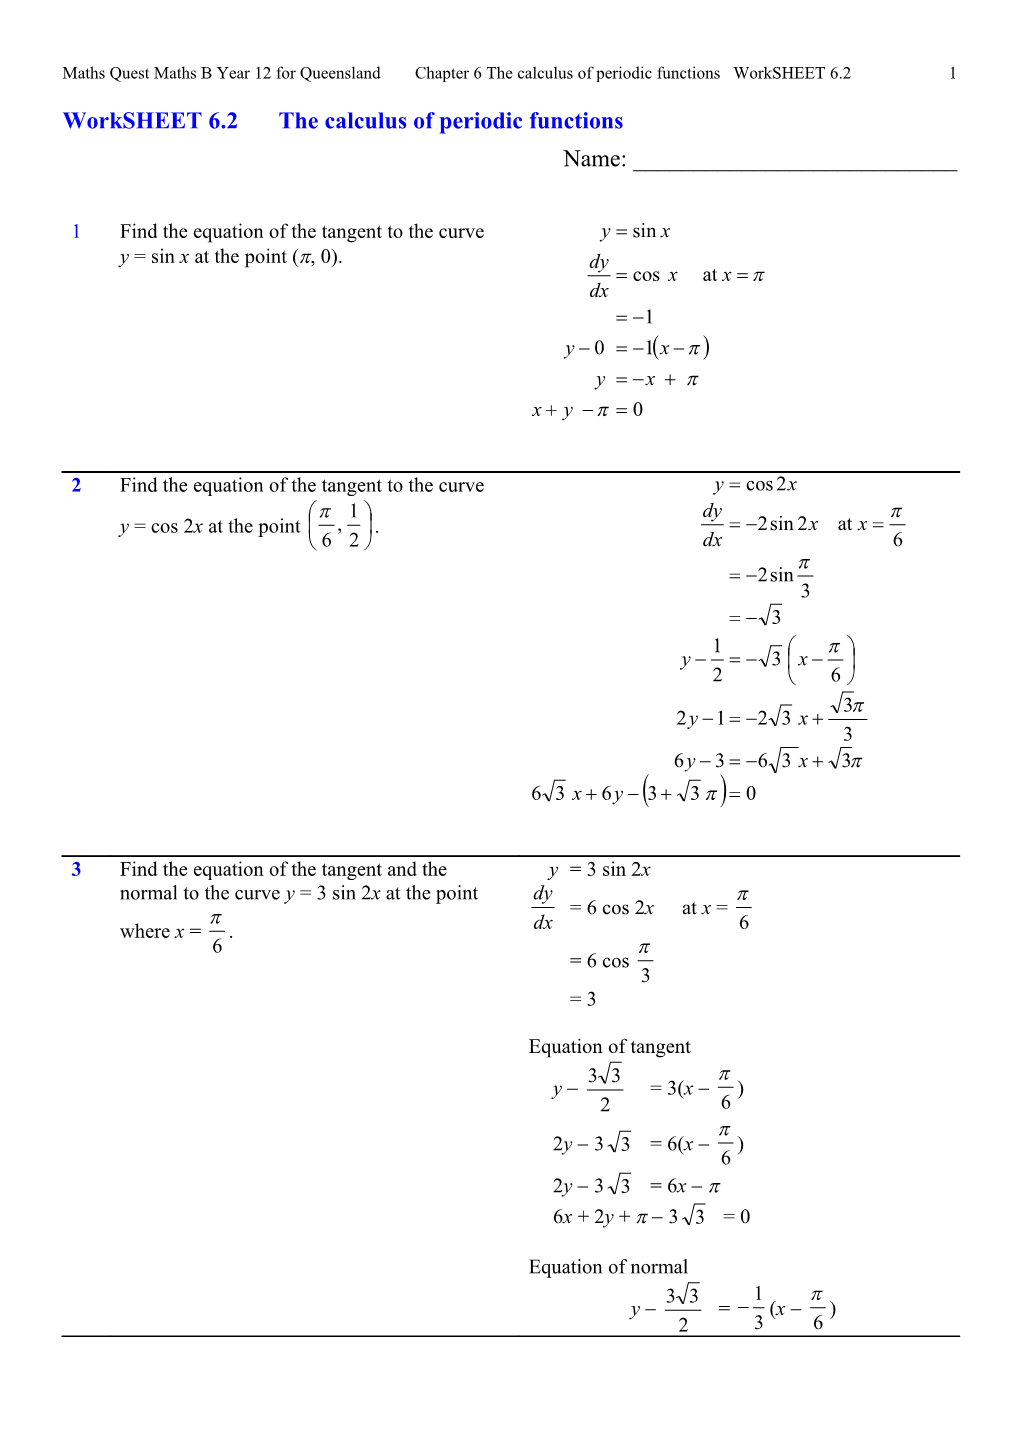 Worksheet 6.2The Calculus of Periodic Functions